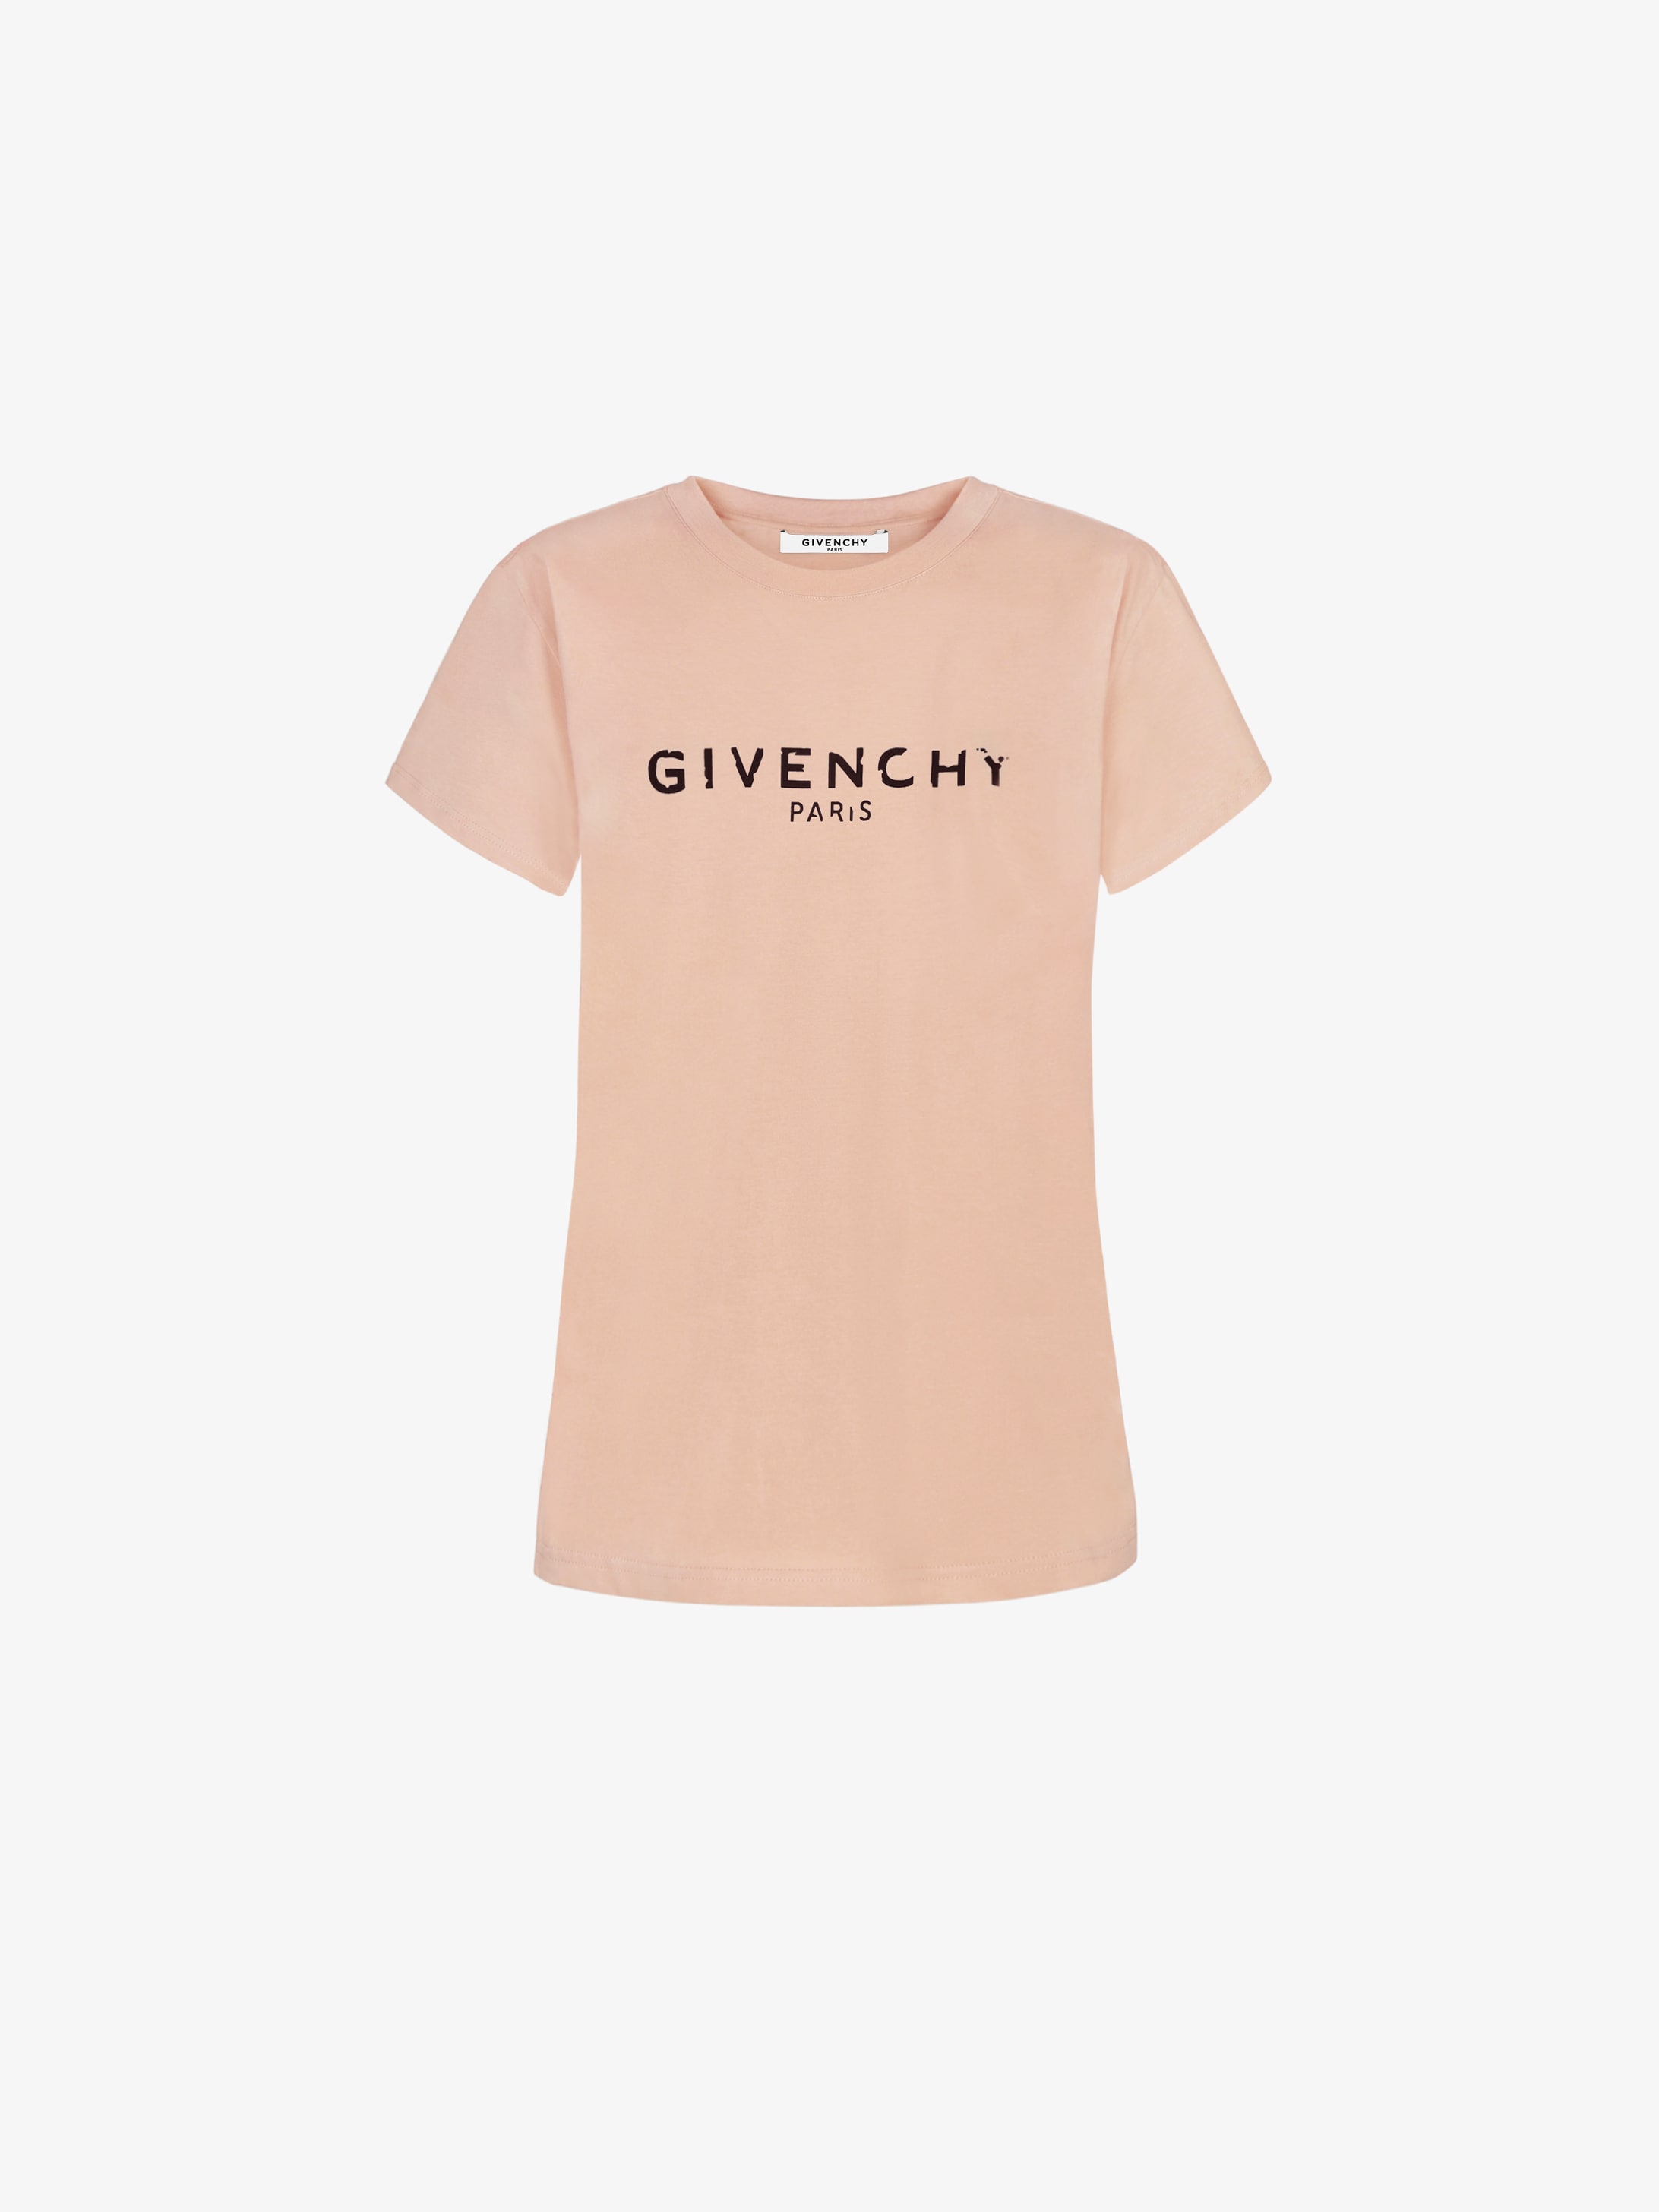 givenchy top